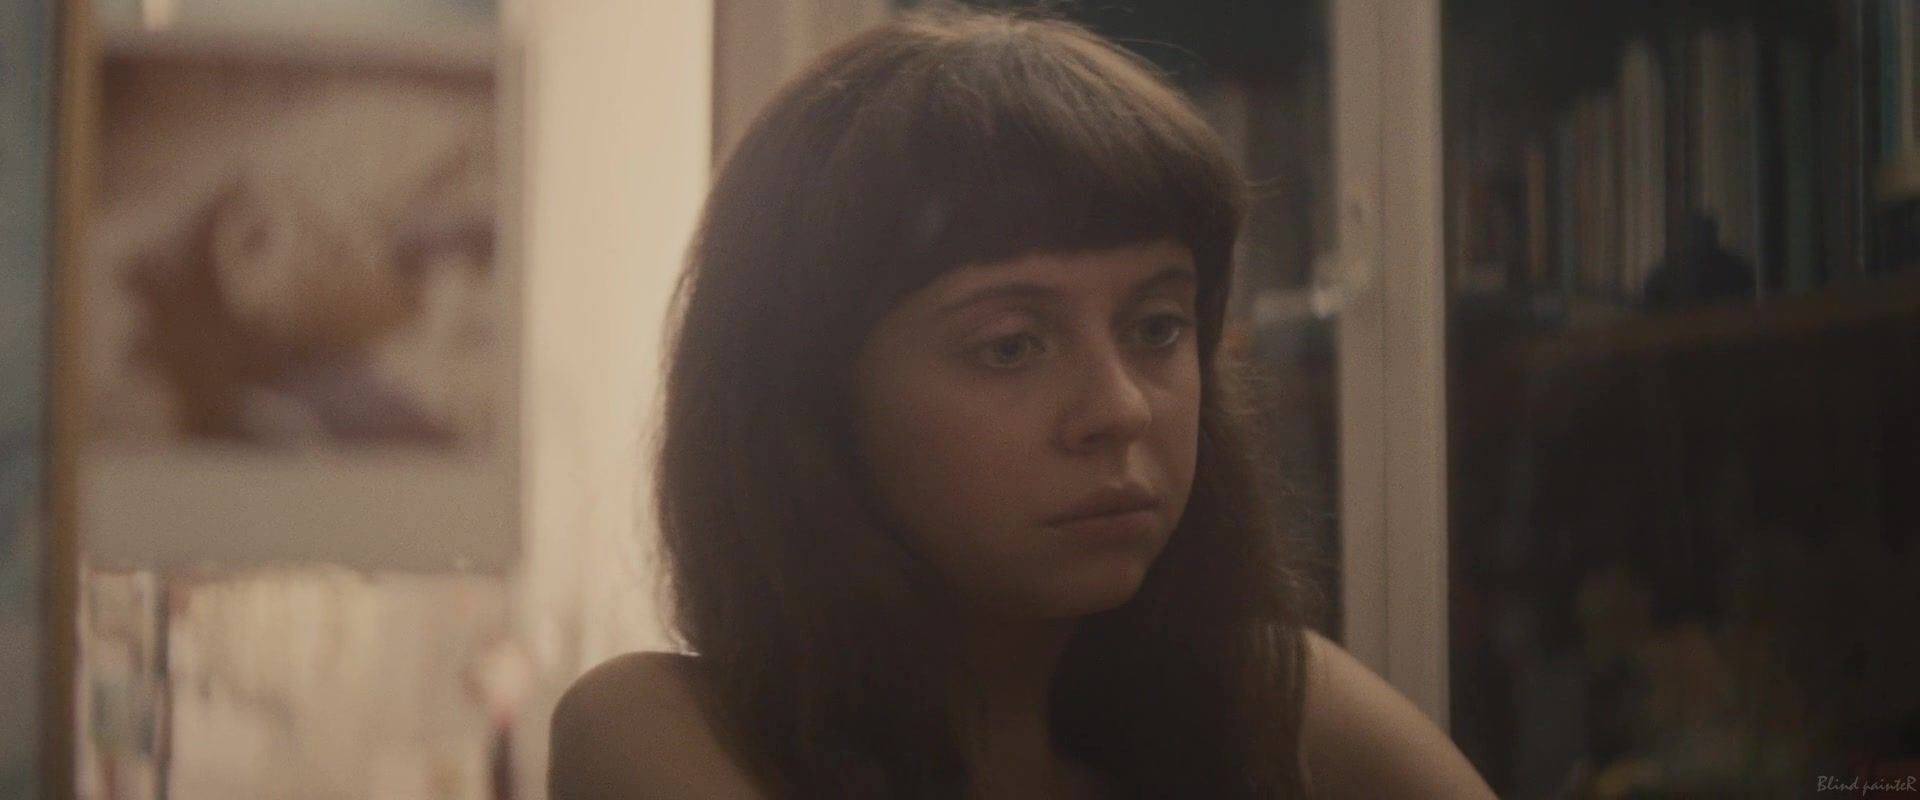 Bus Bel Powley - The Diary Of A Teenage Girl (2015) Stepdaughter